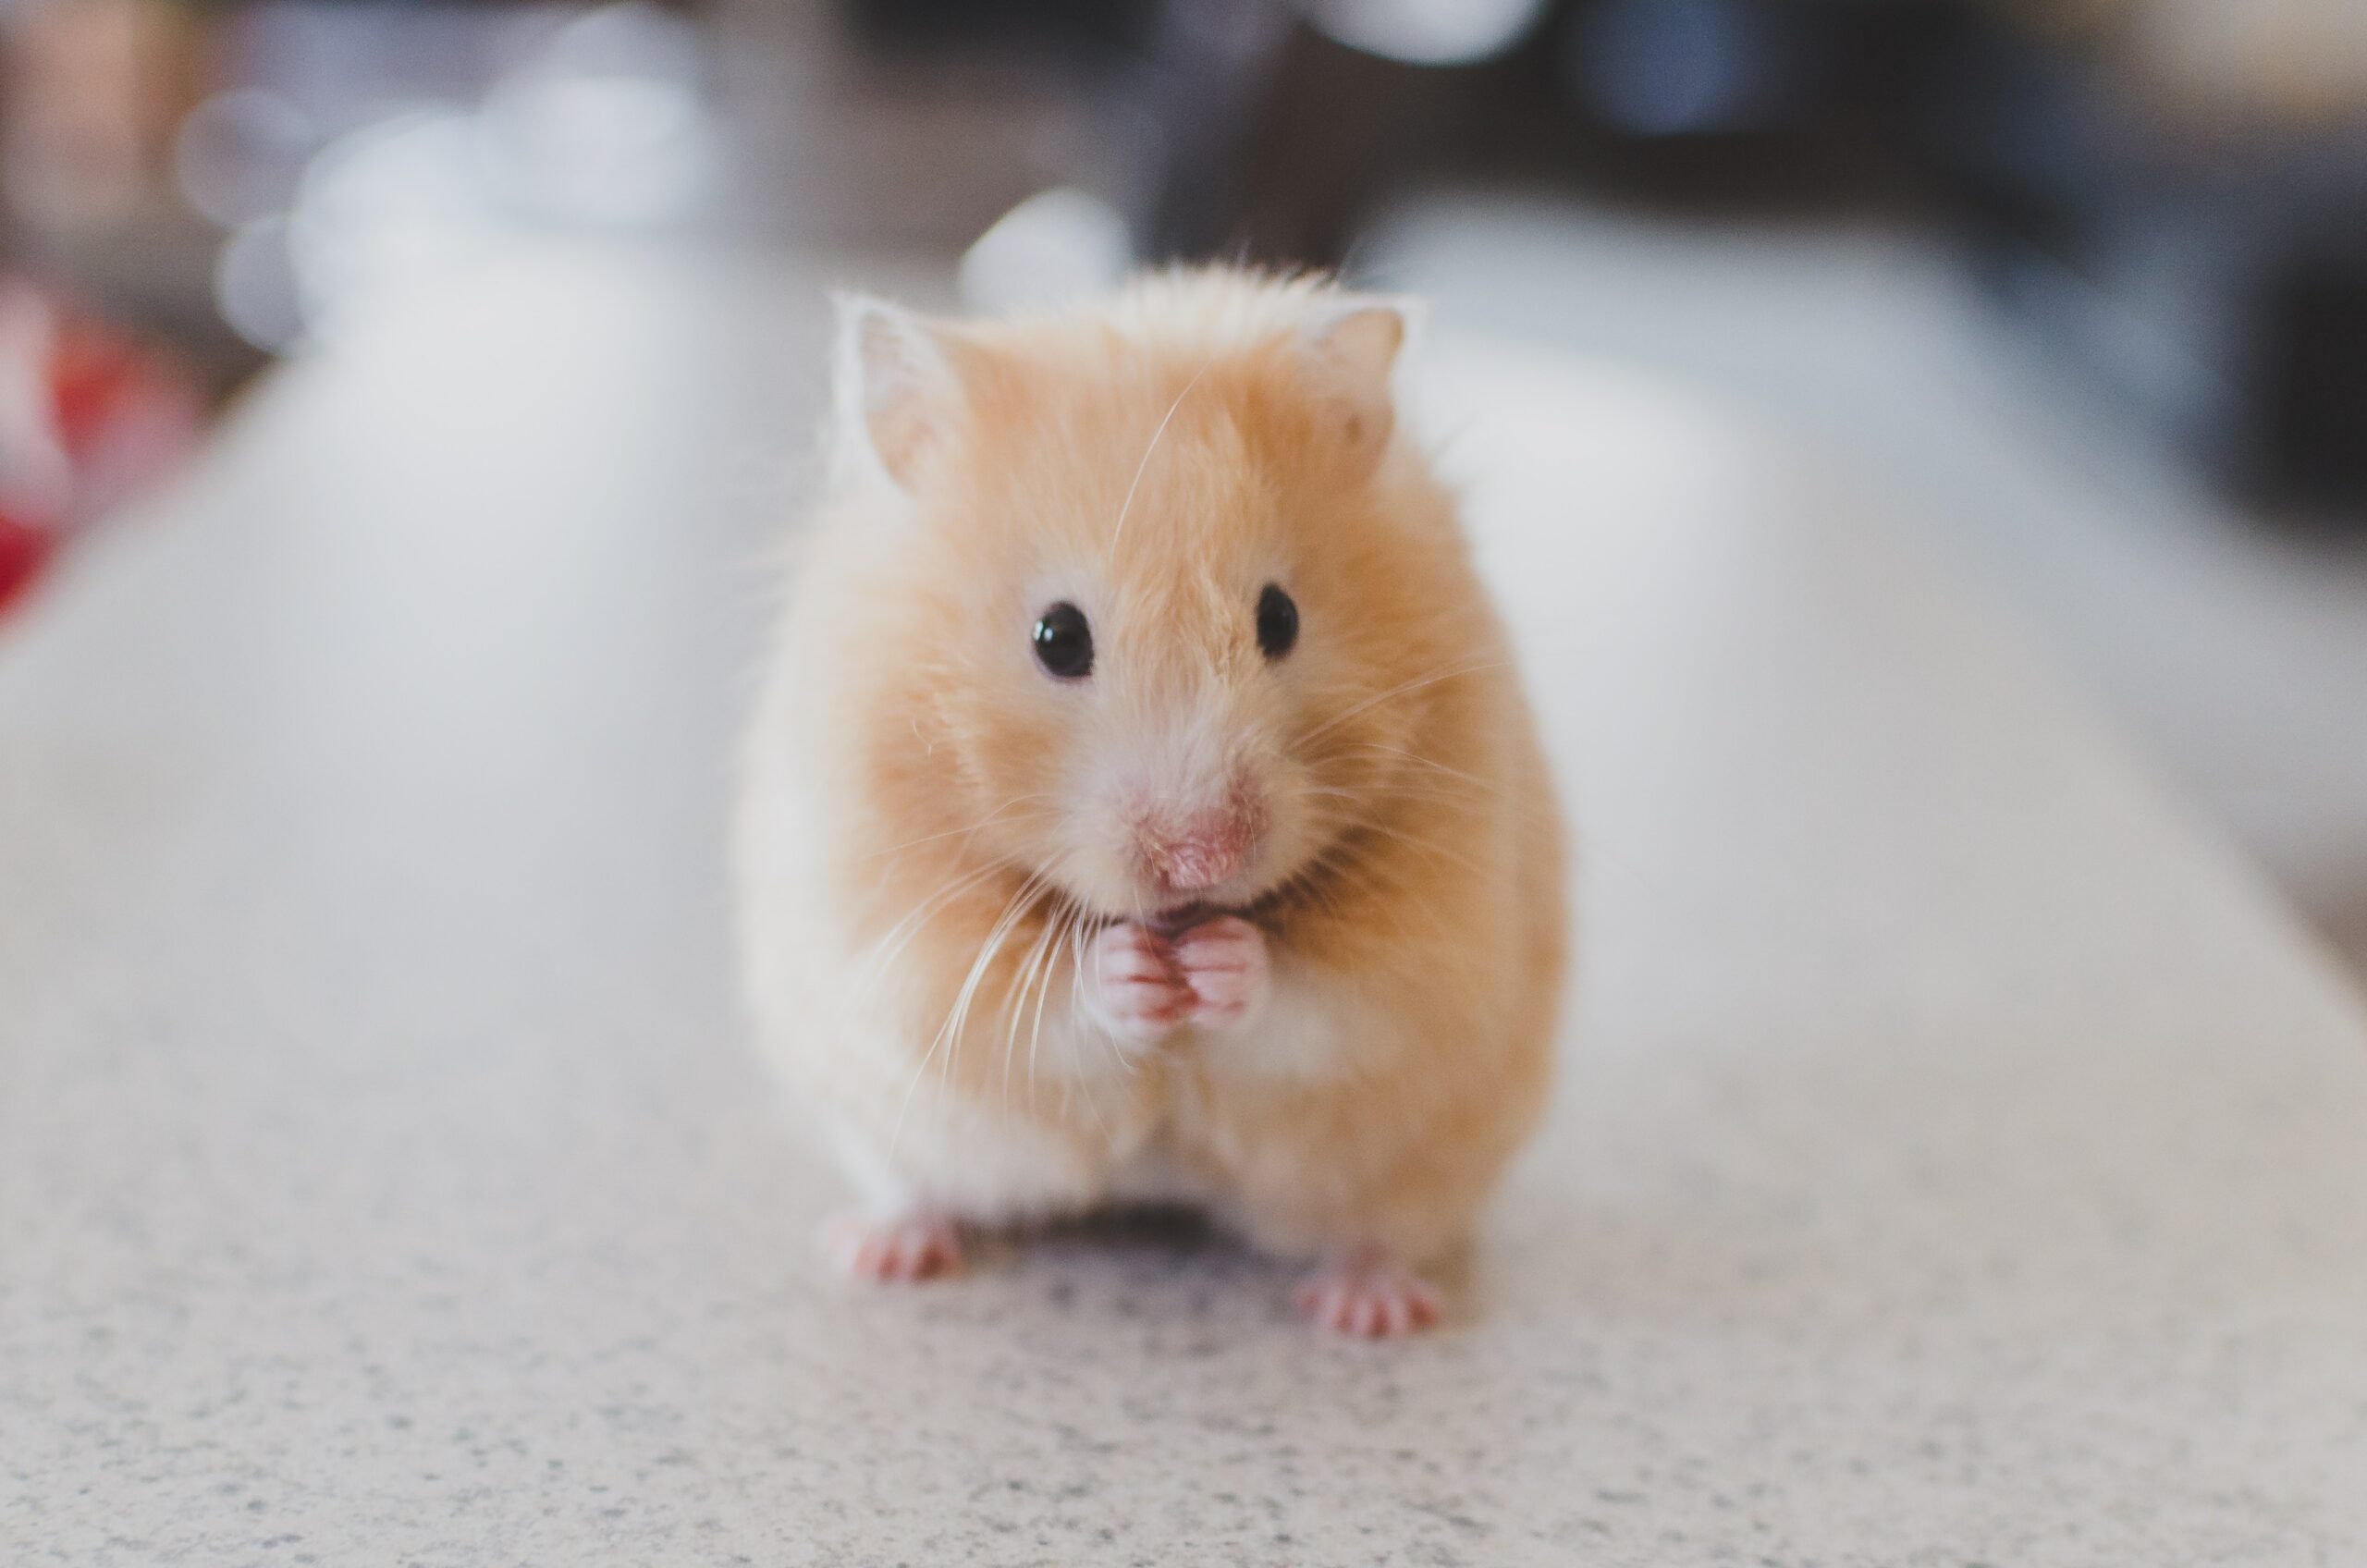 Have a picture of a hamster.